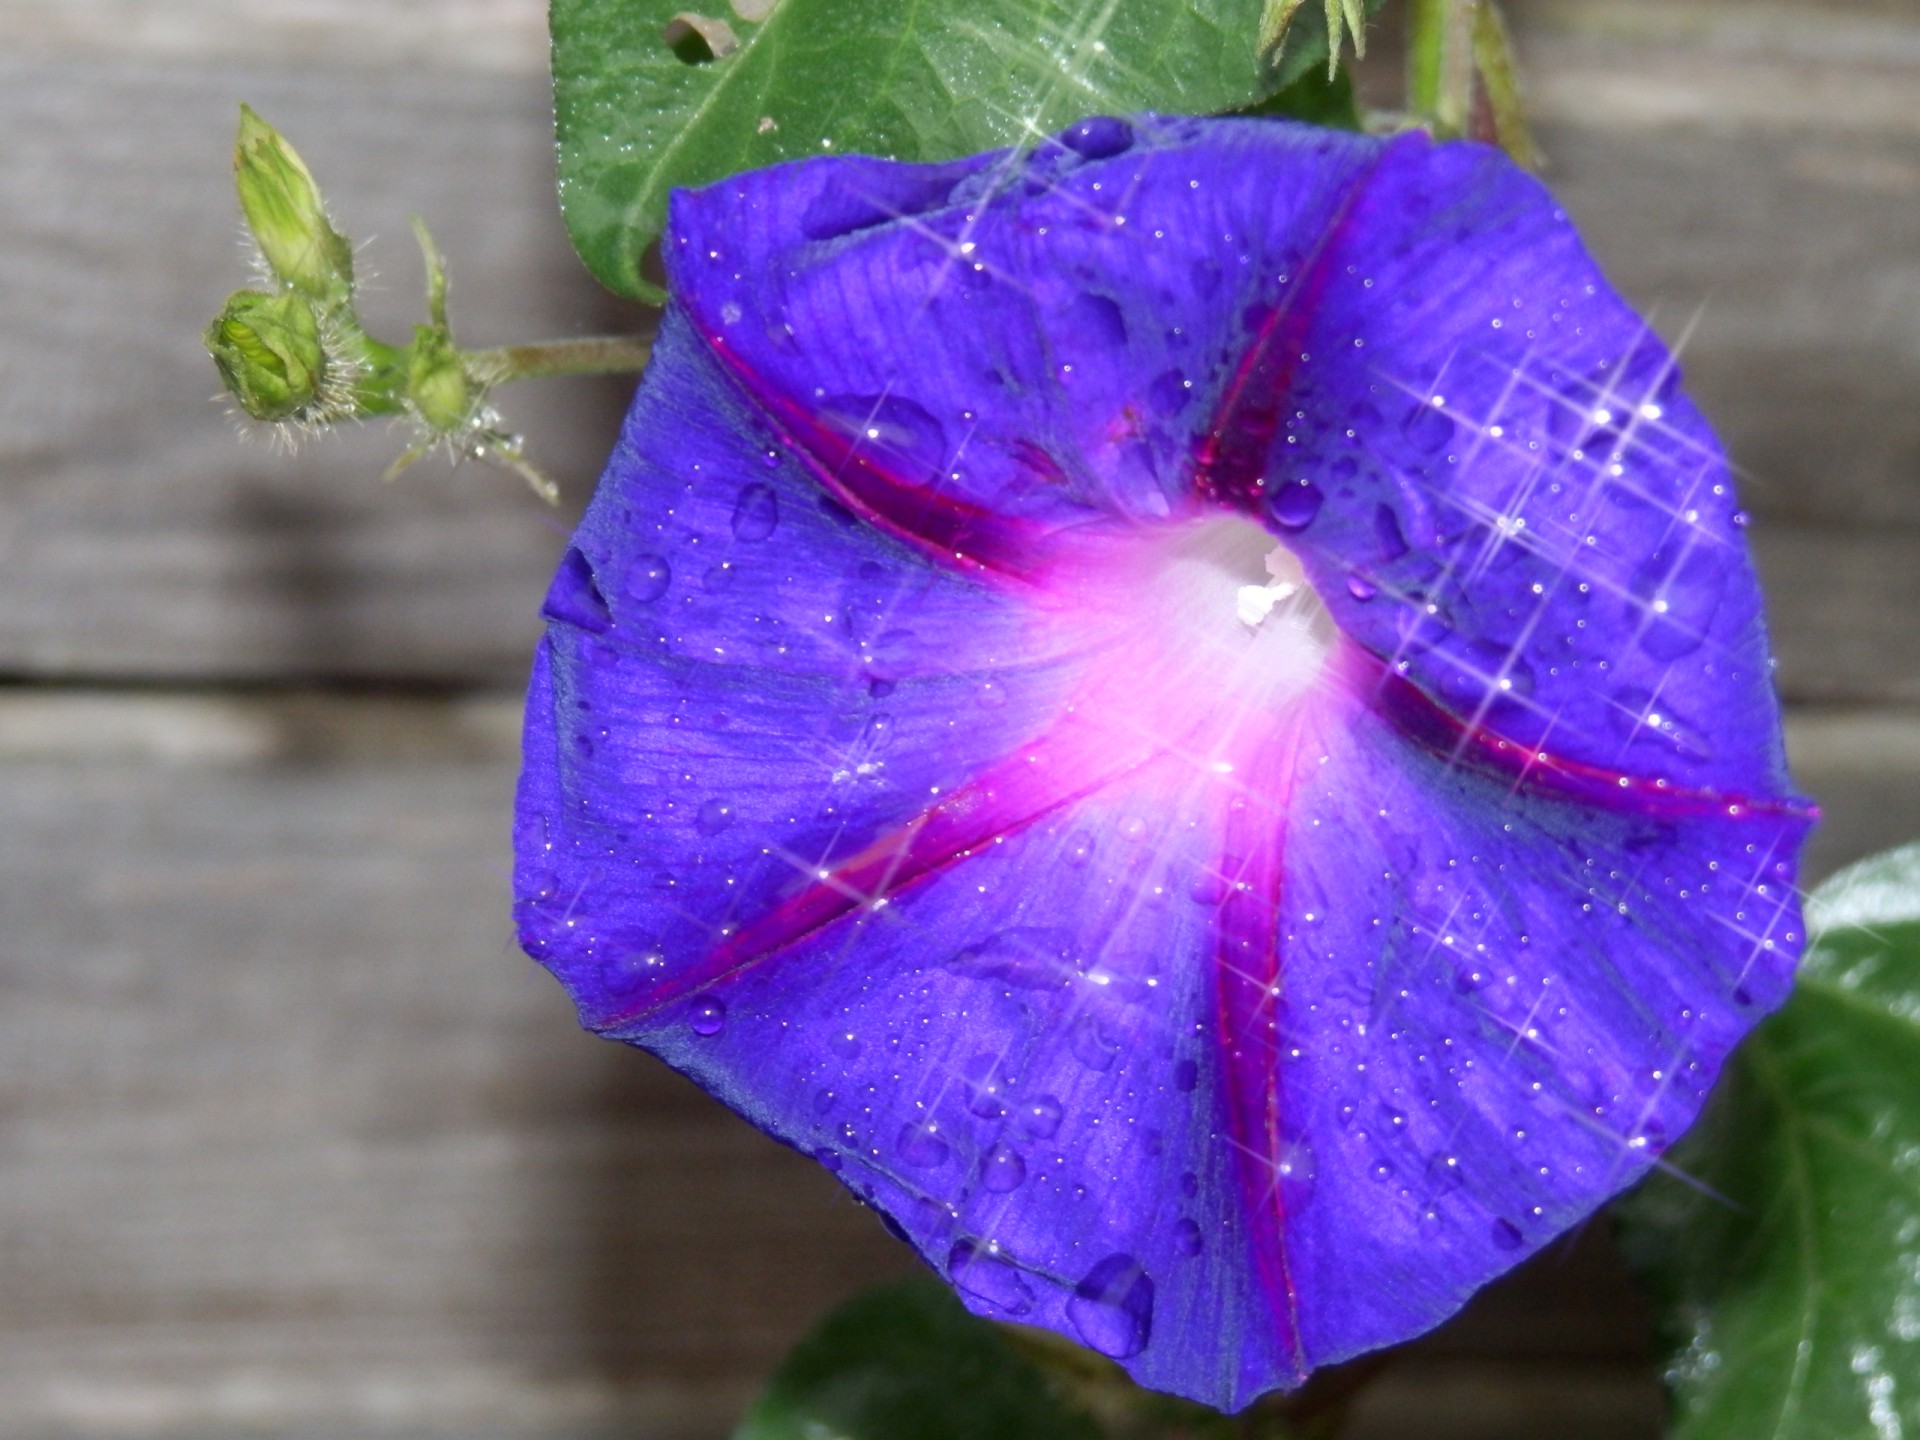 sparkling wet morning glory against fence